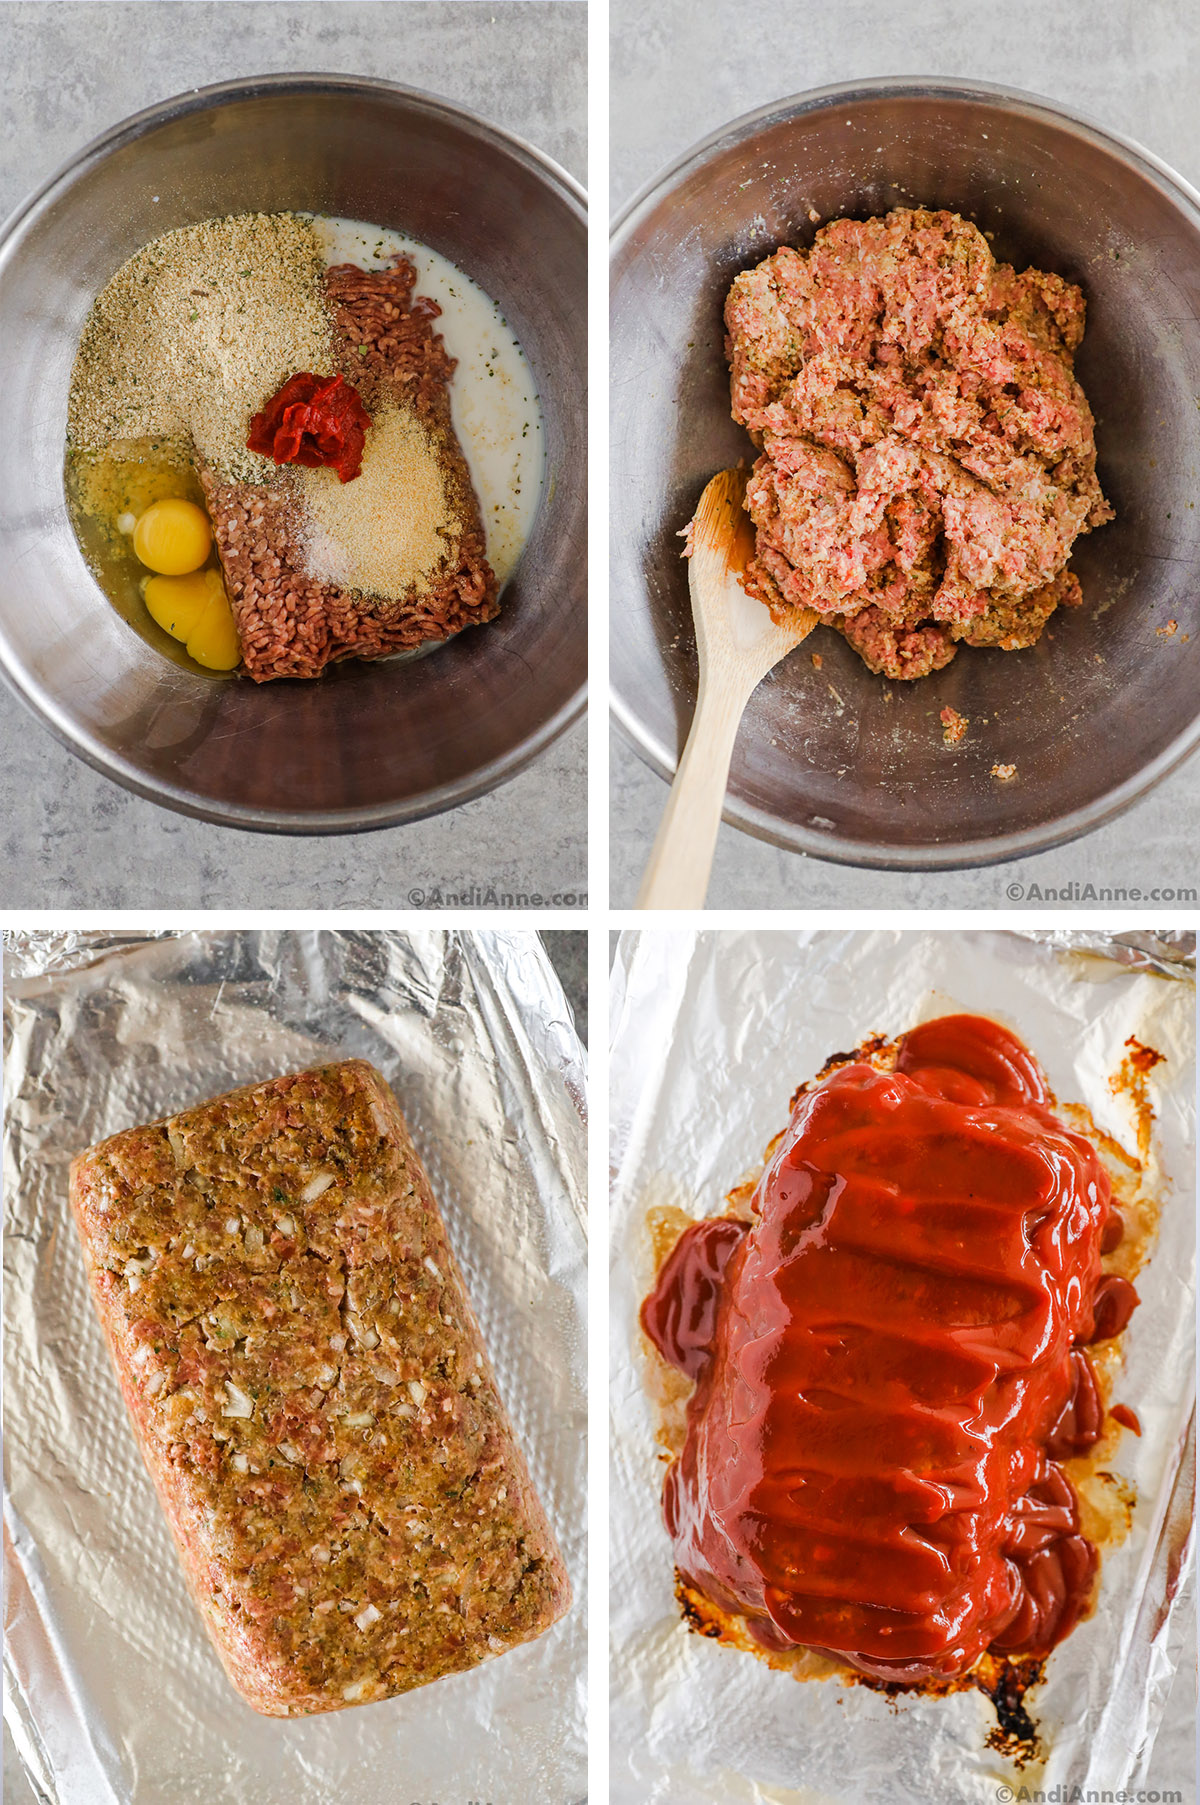 Four images showing recipe steps. First is ingredients dumped in a steel bowl. Second is meatloaf mixture in steel bowl and mixed together. Third is raw meatloaf shape on a baking sheet. Fourth is baked meatloaf covered in sauce.